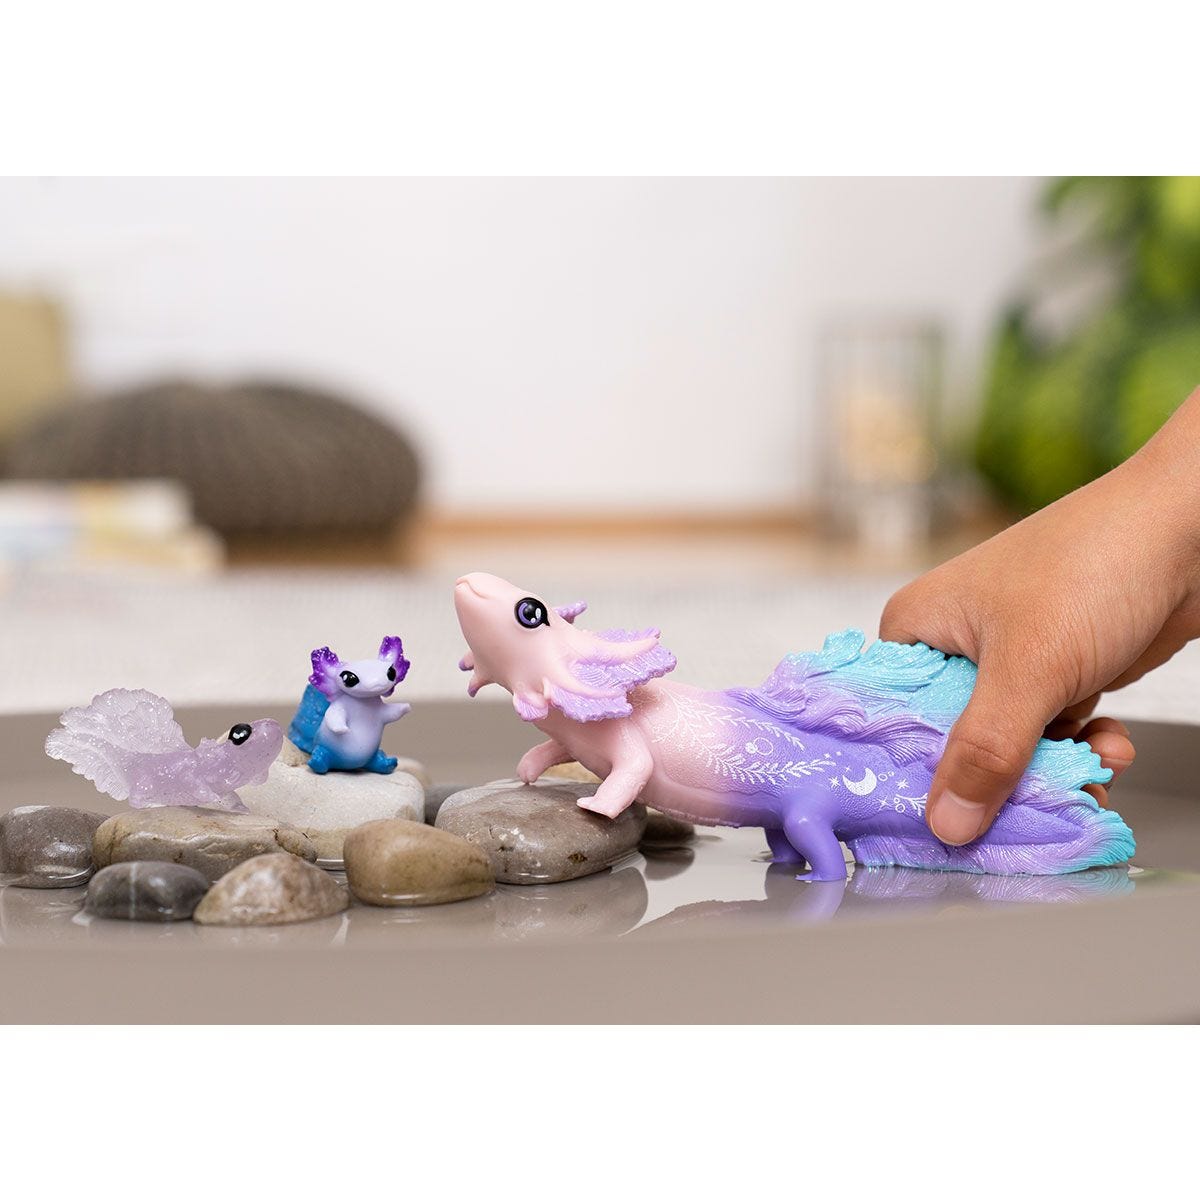 Axolotl Discovery Set by Schleich #42628